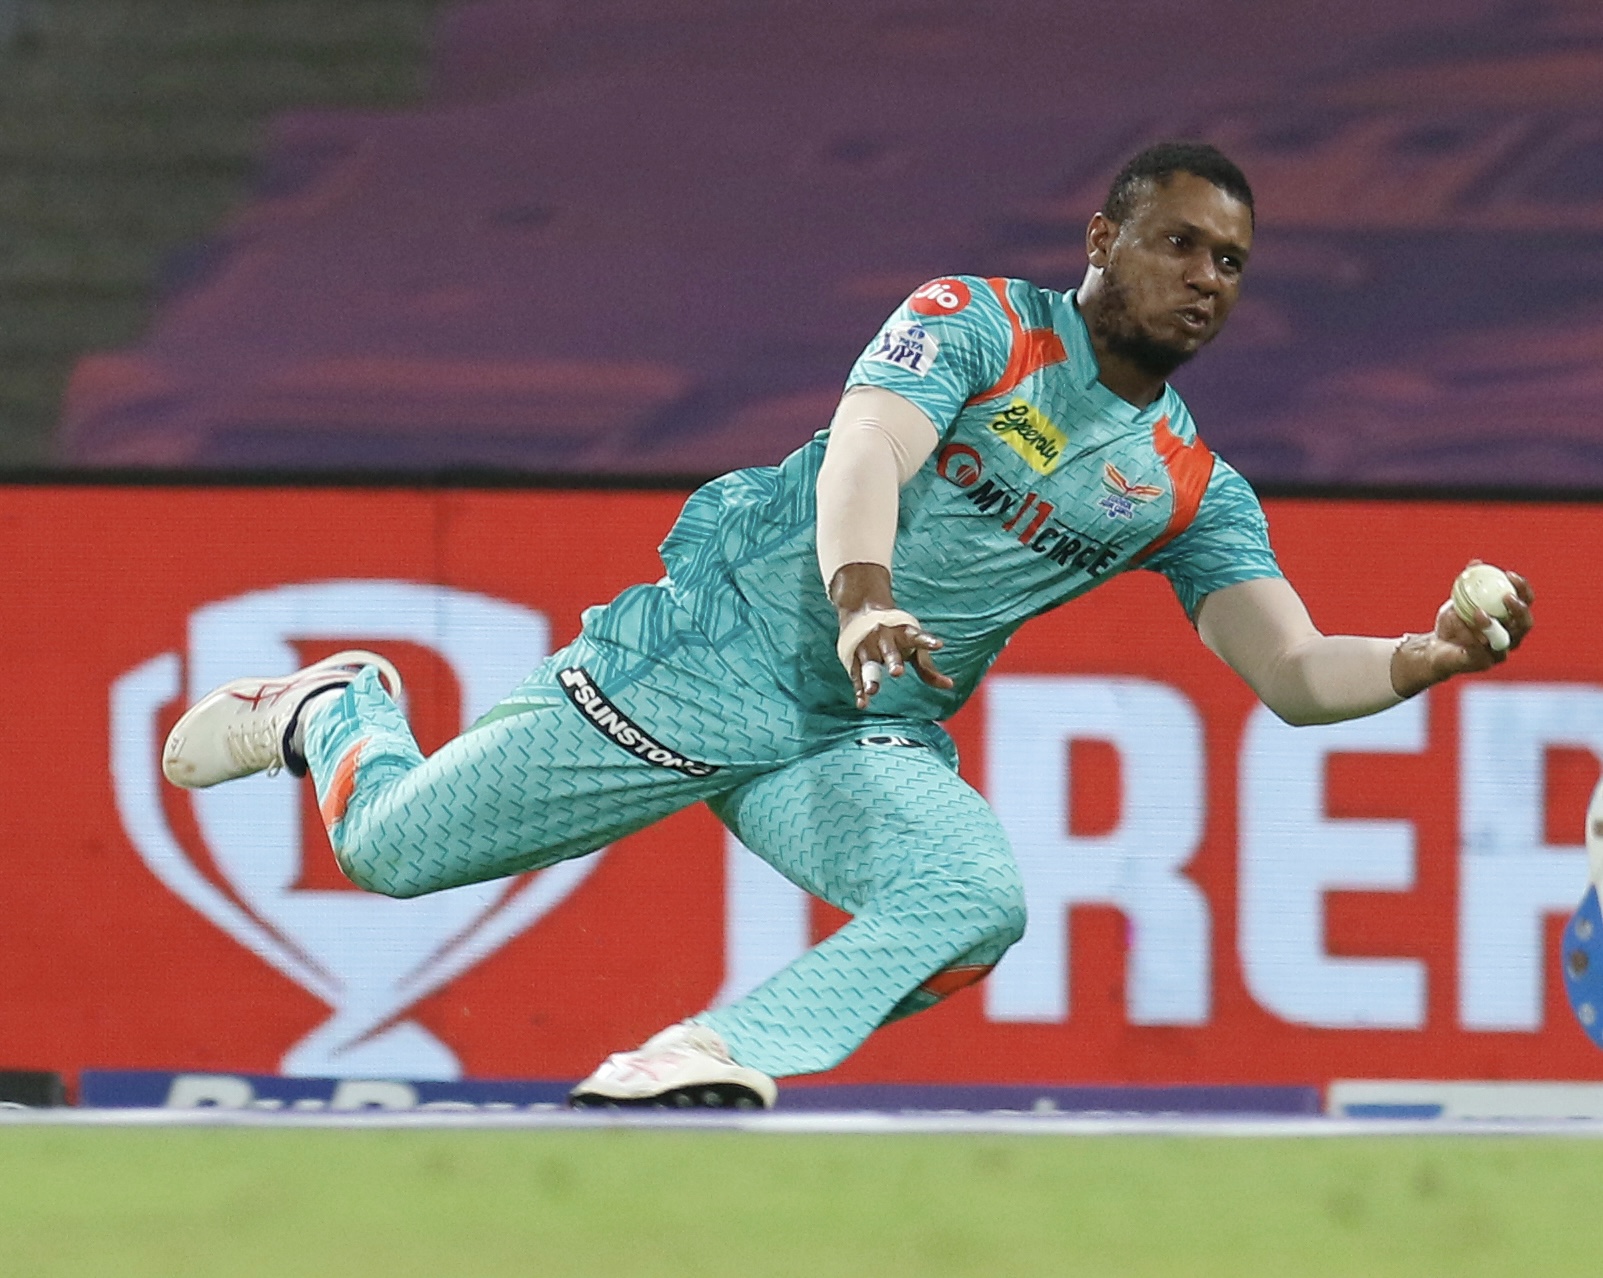 IPL 2022 WATCH Evin Lewis plucks onehanded stunner to end a special